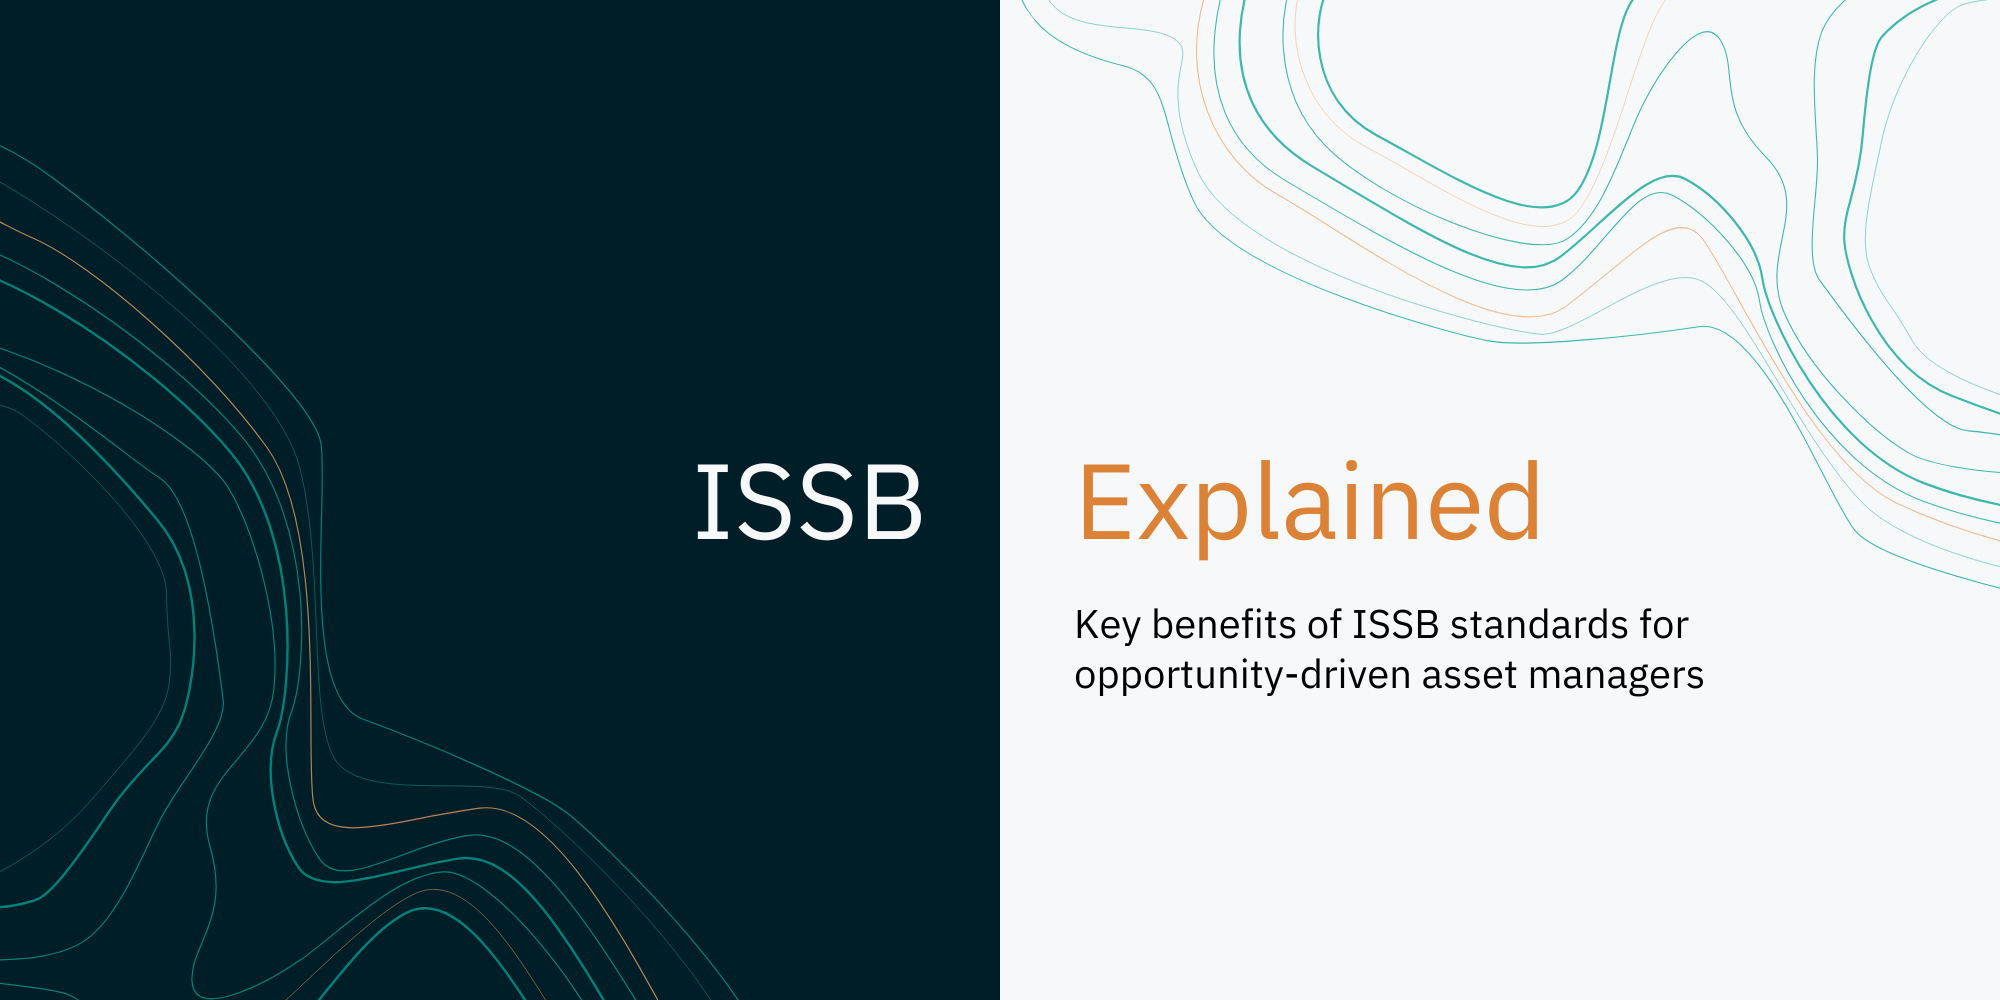 ISSB Explained: Key benefits of ISSB standards for opportunity-driven asset managers